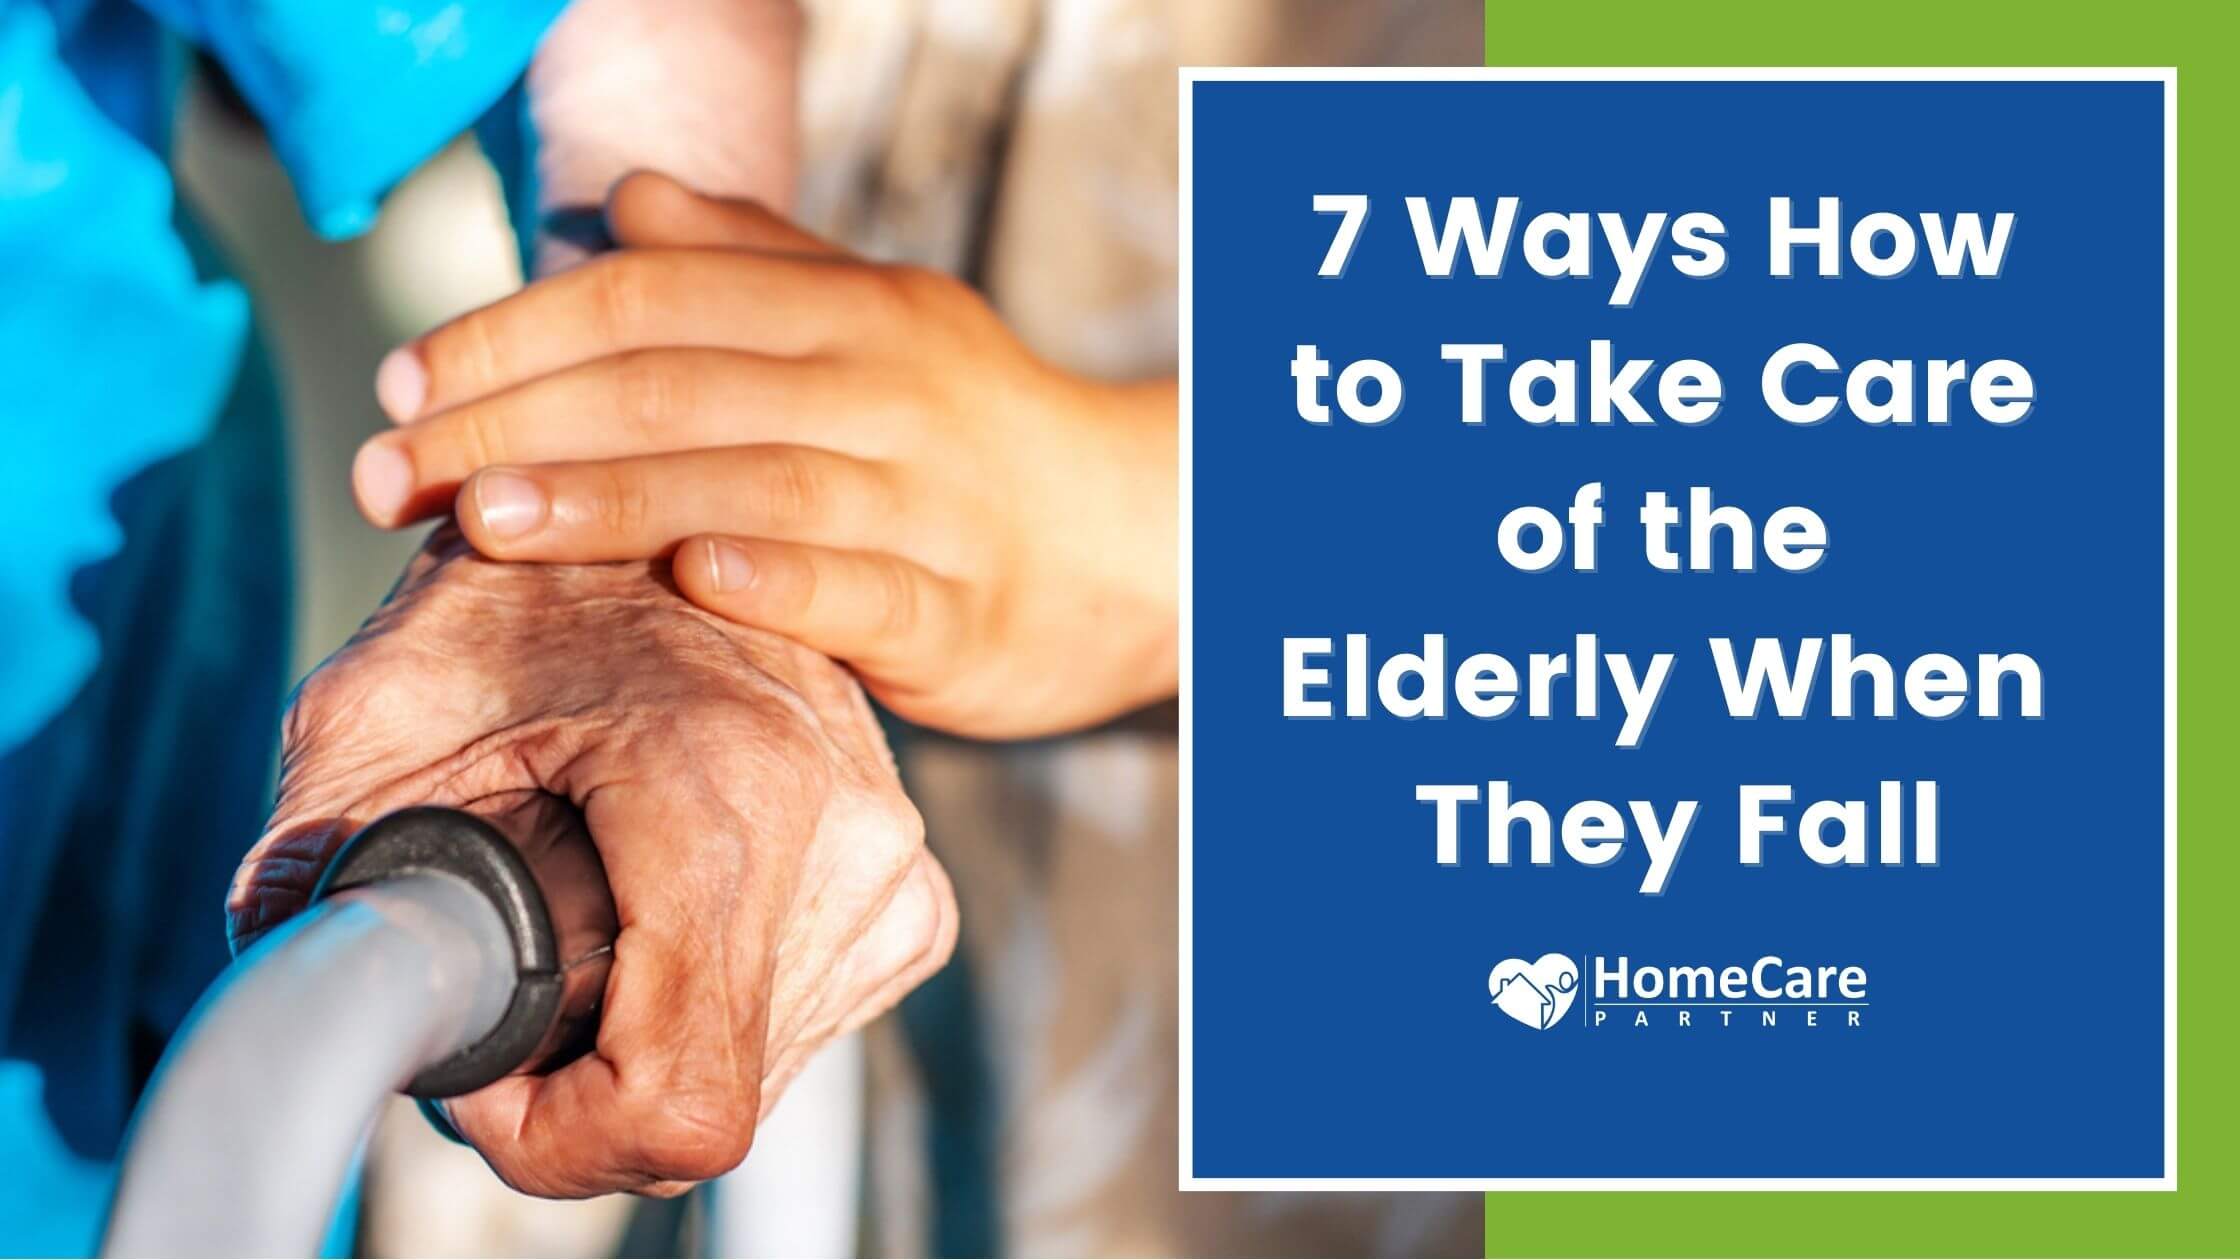 7 Ways How to Take Care of the Elderly When They Fall